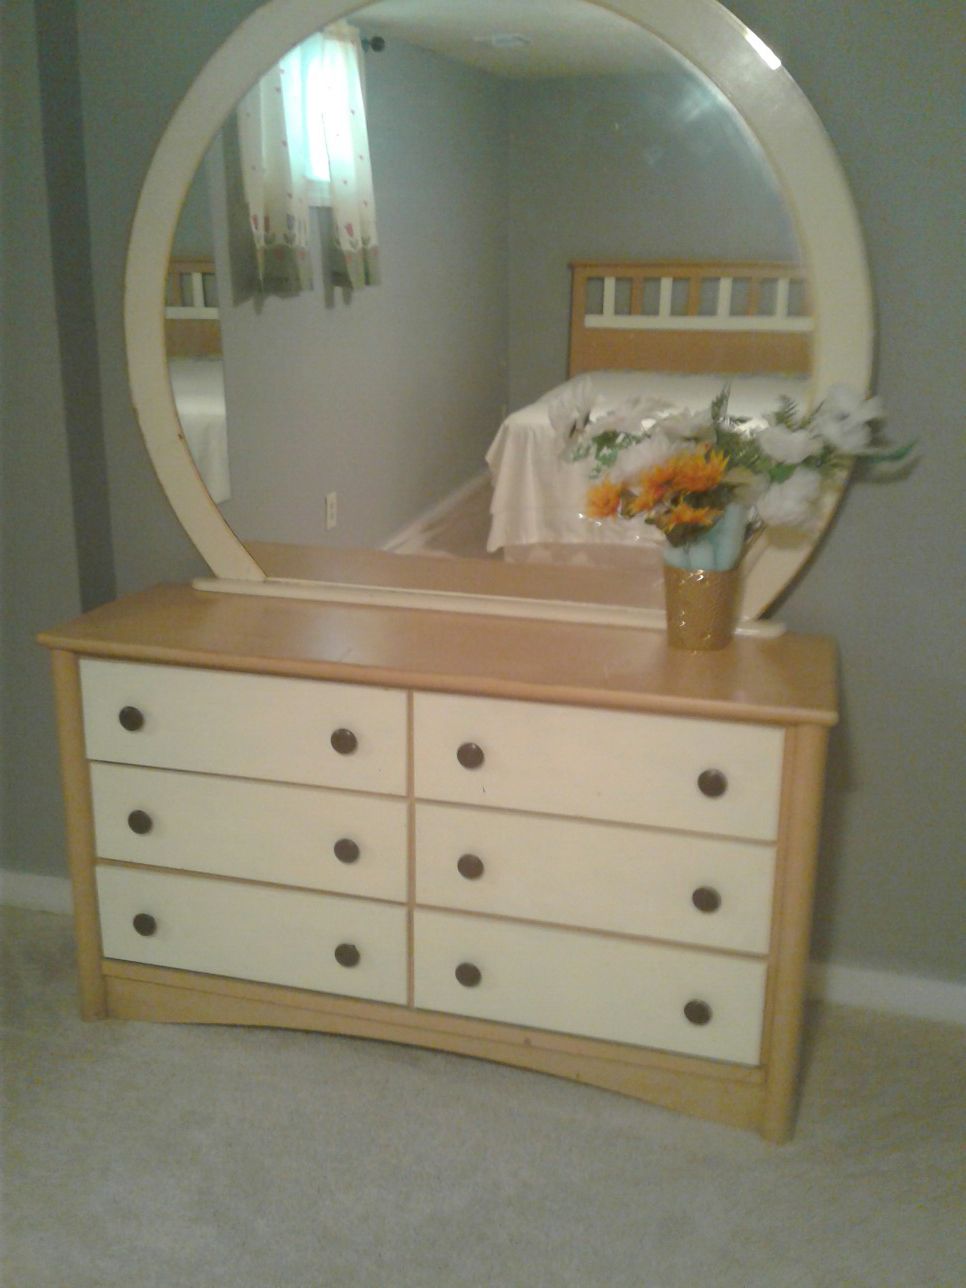 King size bed with dresser